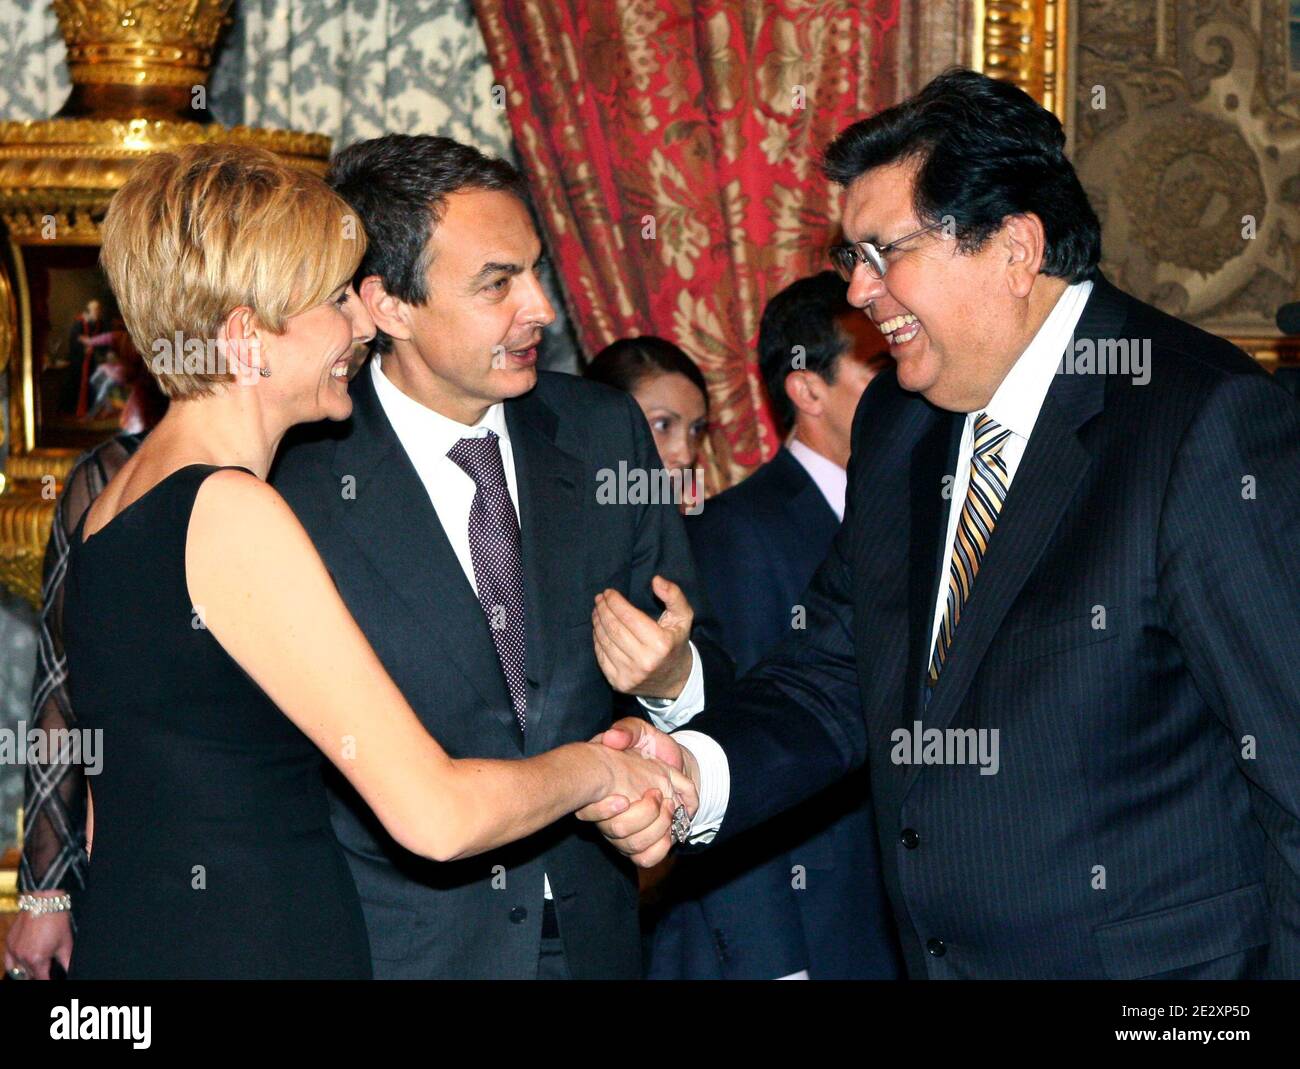 President of Peru, Alan Garcia (R) shakes hands with Sonsoles Espinosa as her husband Spanish Prime Minister Jose Luis Rodriguez Zapatero looks on at the gala dinner for European Union and Latin America summit leaders at the Royal Palace in Madrid, Spain on May 17, 2010. This was the first time Prince Felipe replaced his father King Juan Carlos as host of an official dinner at the Royal Palace. The King is still convalescent of last week's operation. Photo by Almagro/ABACAPRESS.COM Stock Photo